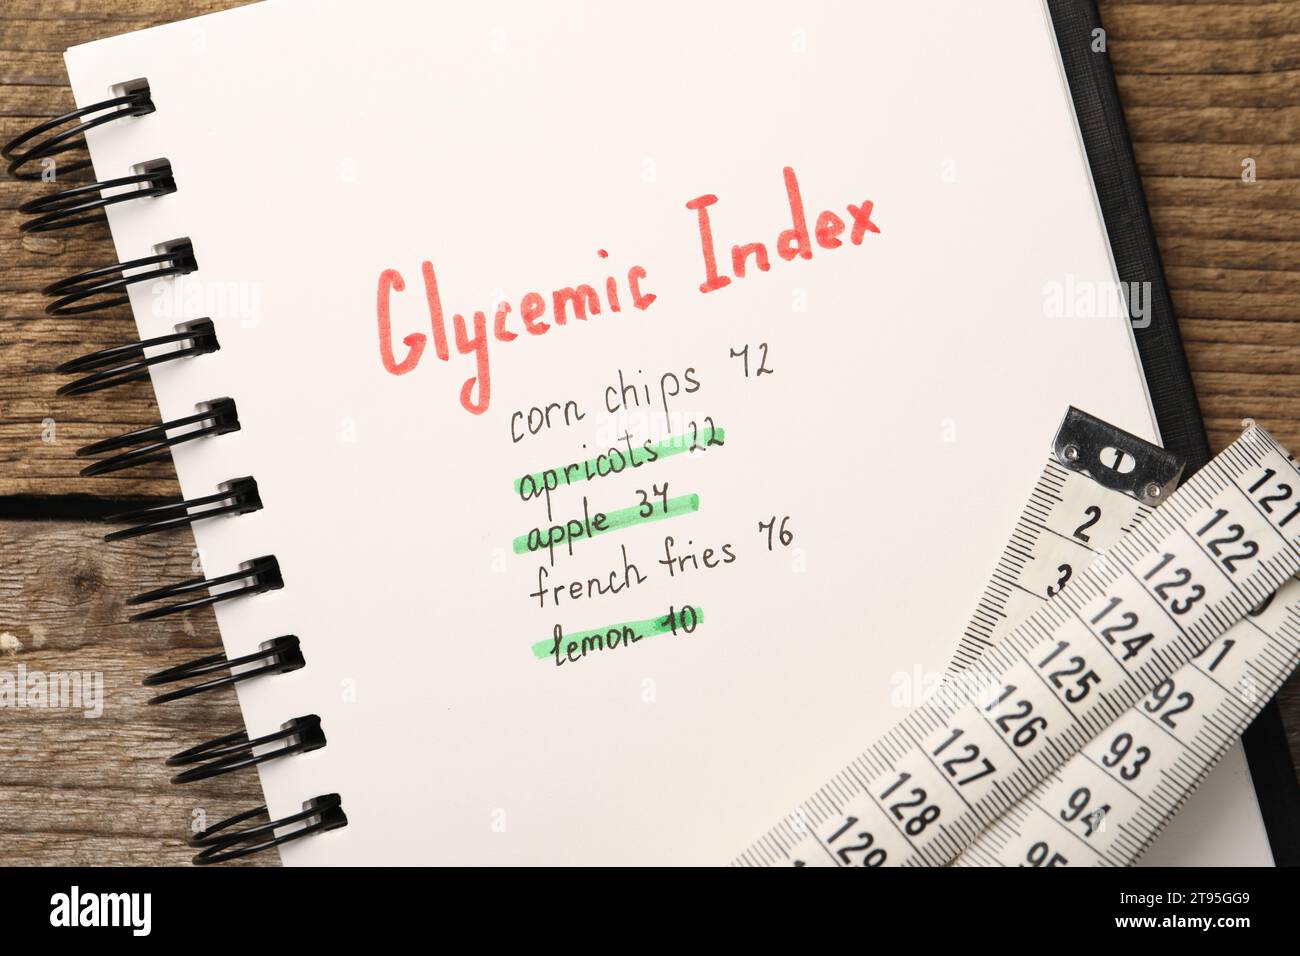 Glycemic Index. Notebook with information and measuring tape on wooden table, top view Stock Photo